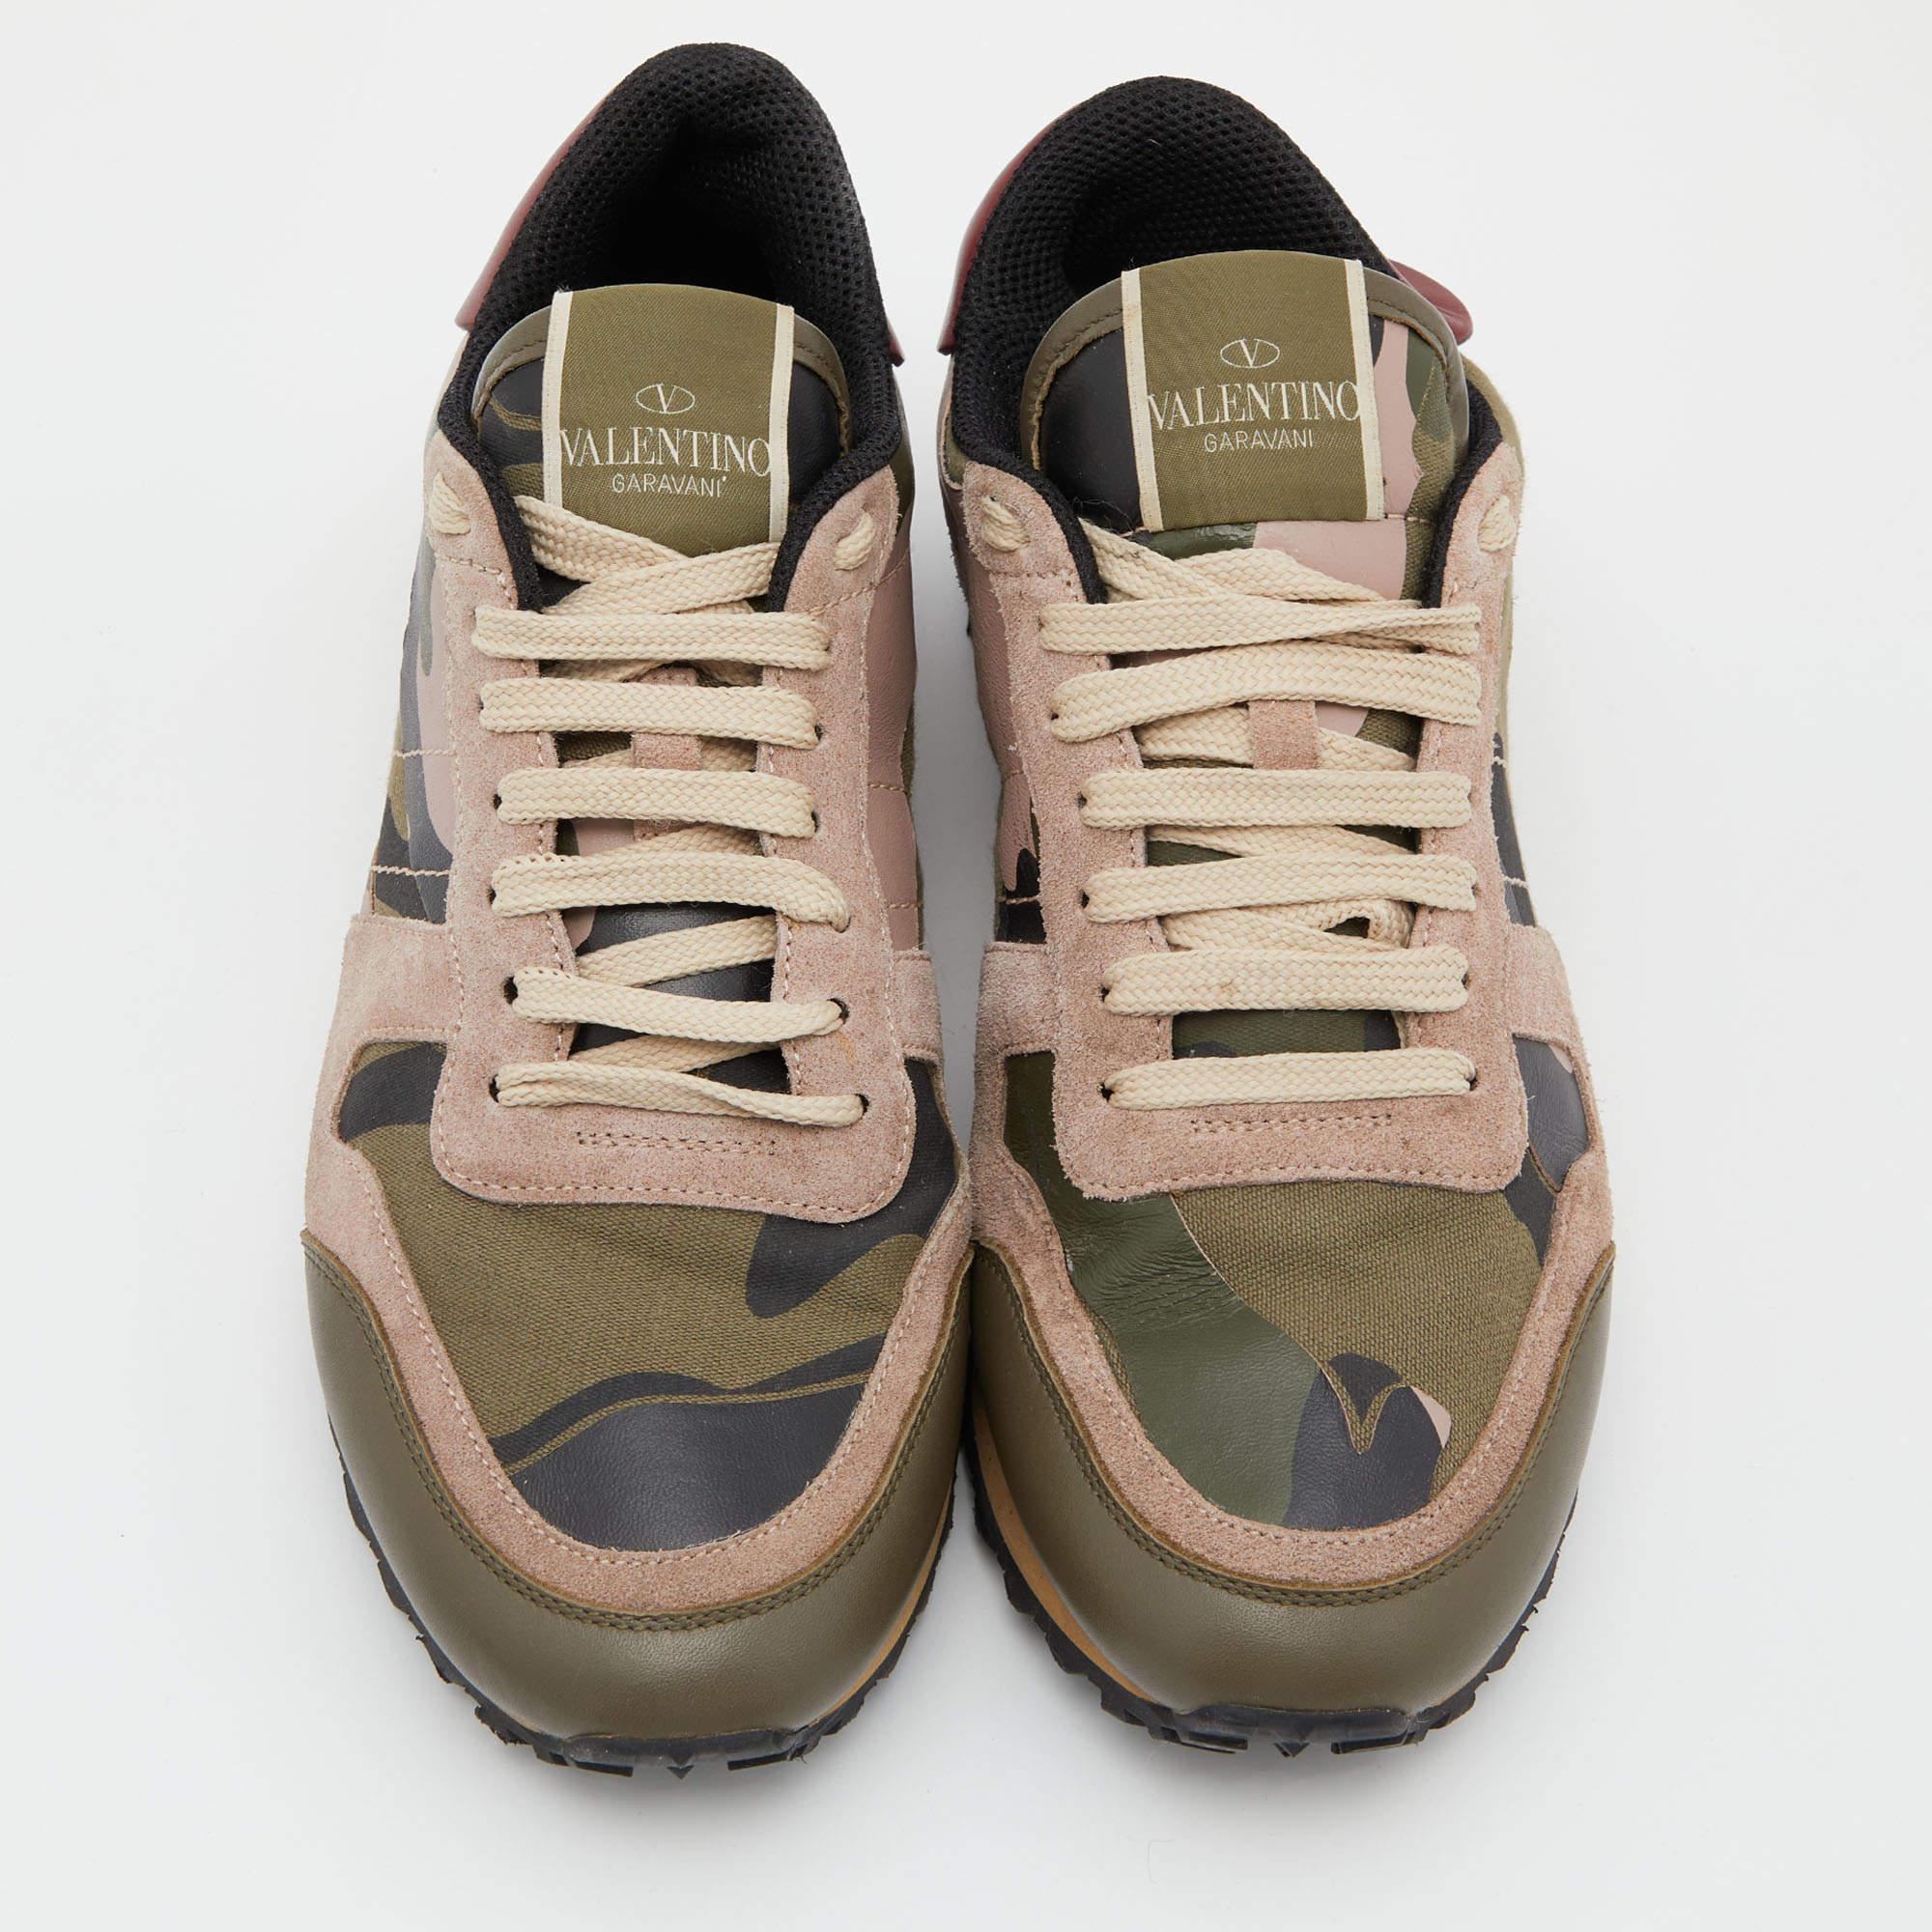 Spend your days away in high comfort with these camouflage Rockrunner sneakers from Valentino! They've been wonderfully crafted from a combination of quality materials and designed with their signature pyramid studs on the counters, laces on the